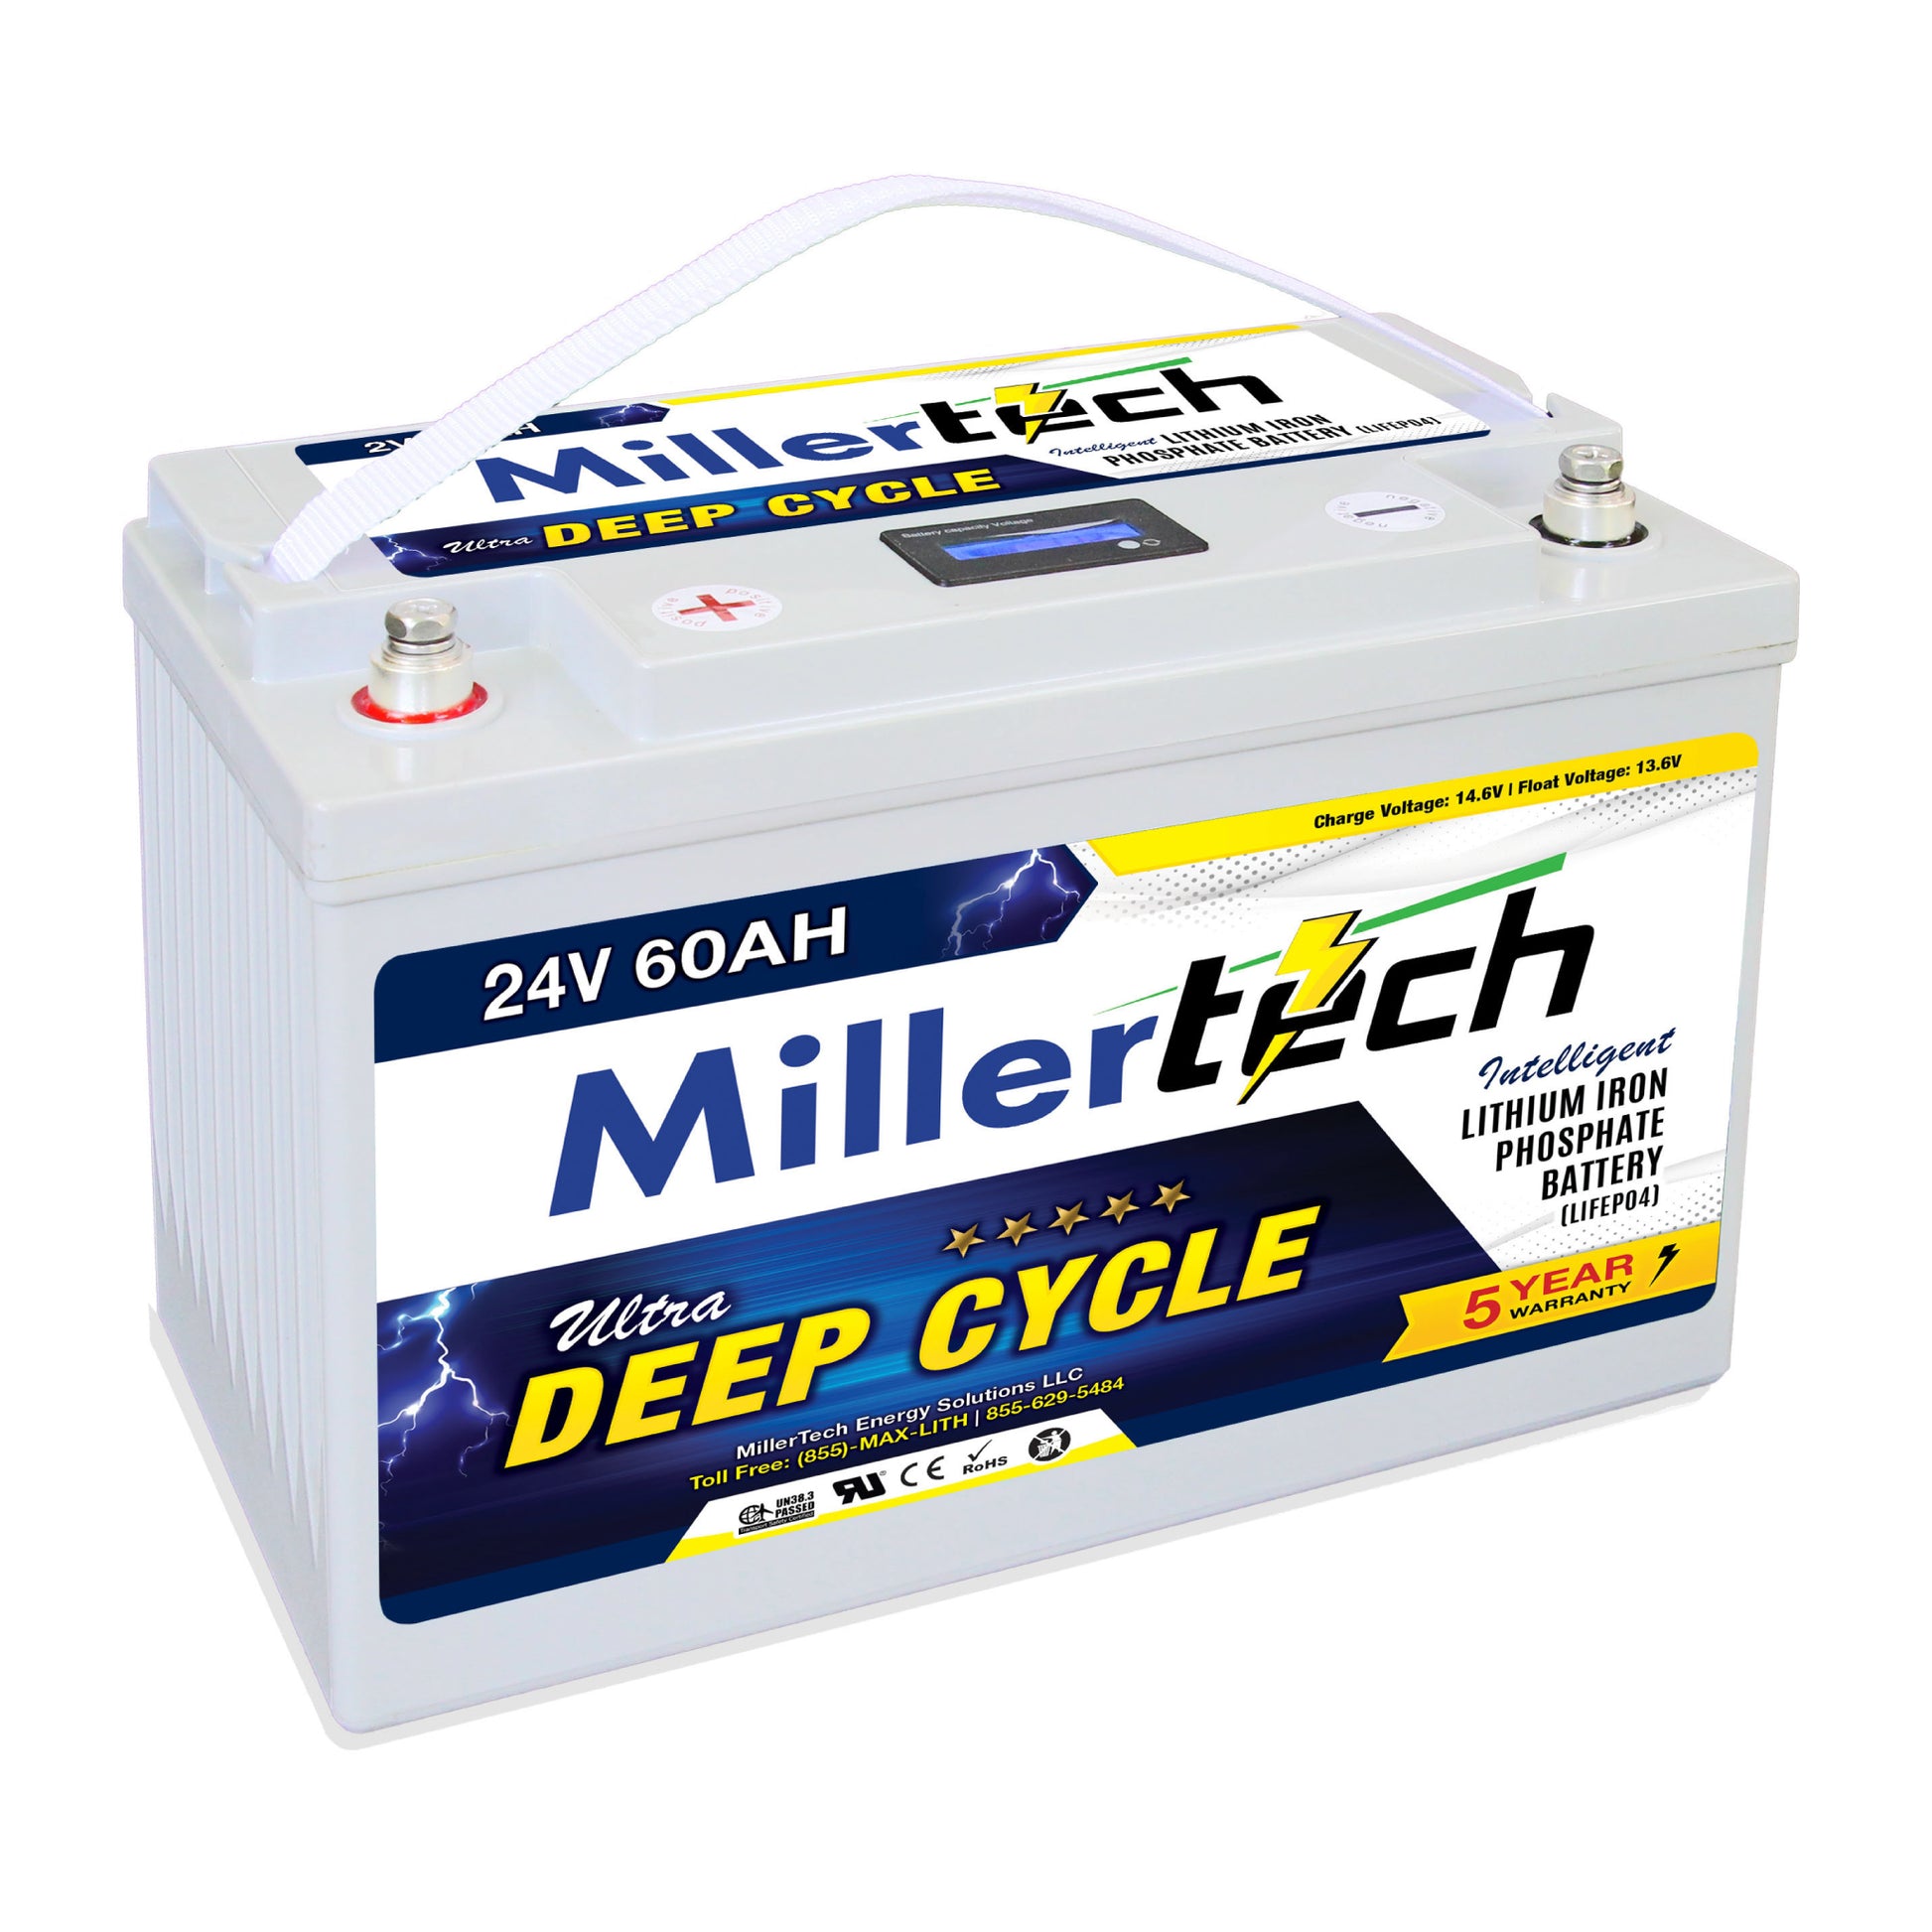 MillerTech 2460L 24V 60Ah Lithium Iron Phosphate Deep Cycle Battery For Boat Trolling Motors, RV's, Golf Carts, Solar Systems, & Off Grid Applications